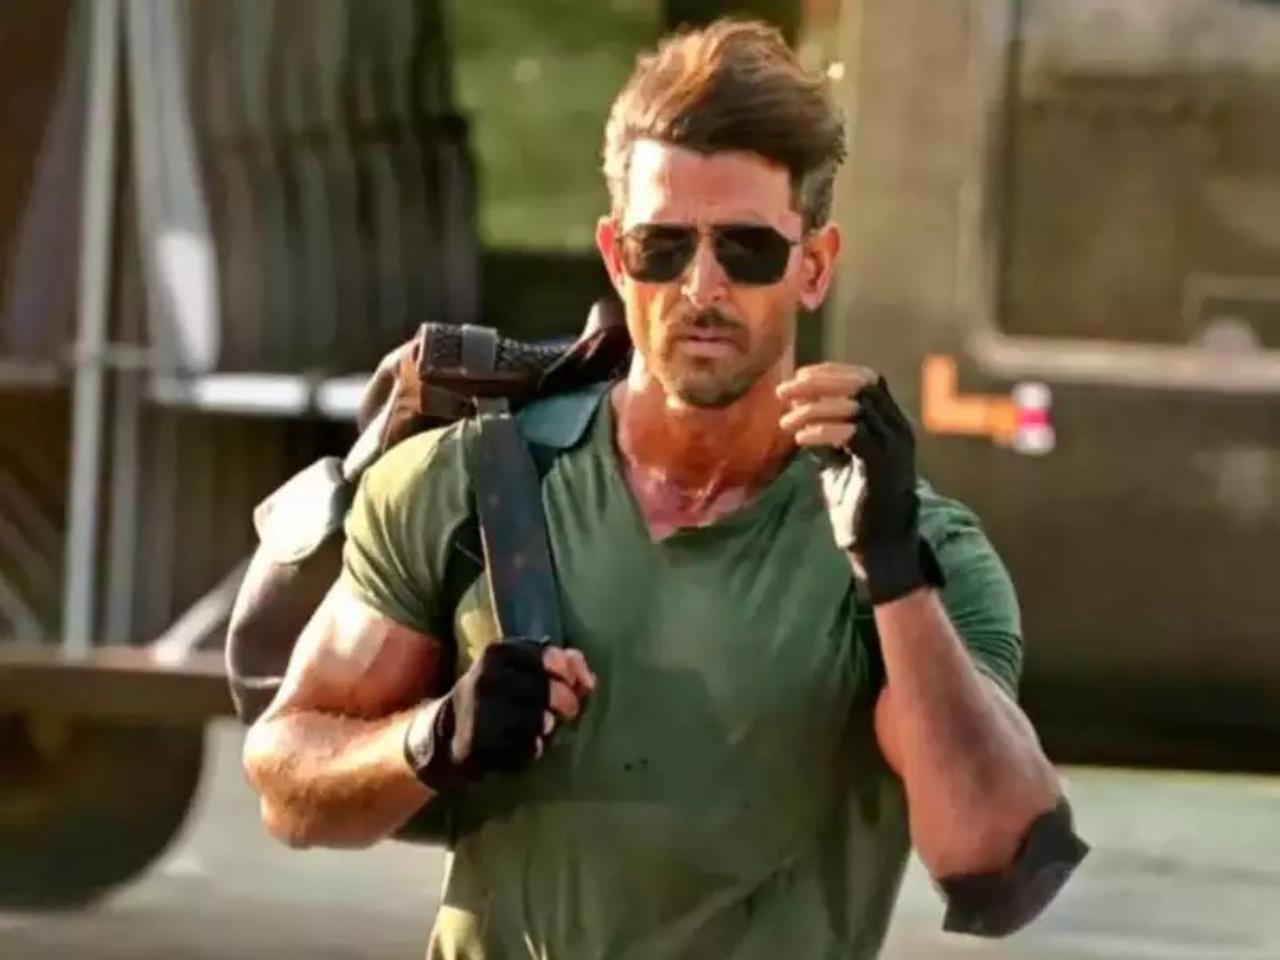 Aalim Hakim tells us about Hrithik's salt and pepper look in War | As a  hairstylist, it is always thrilling to be provided with opportunities to  experiment. While Kabir allowed me to